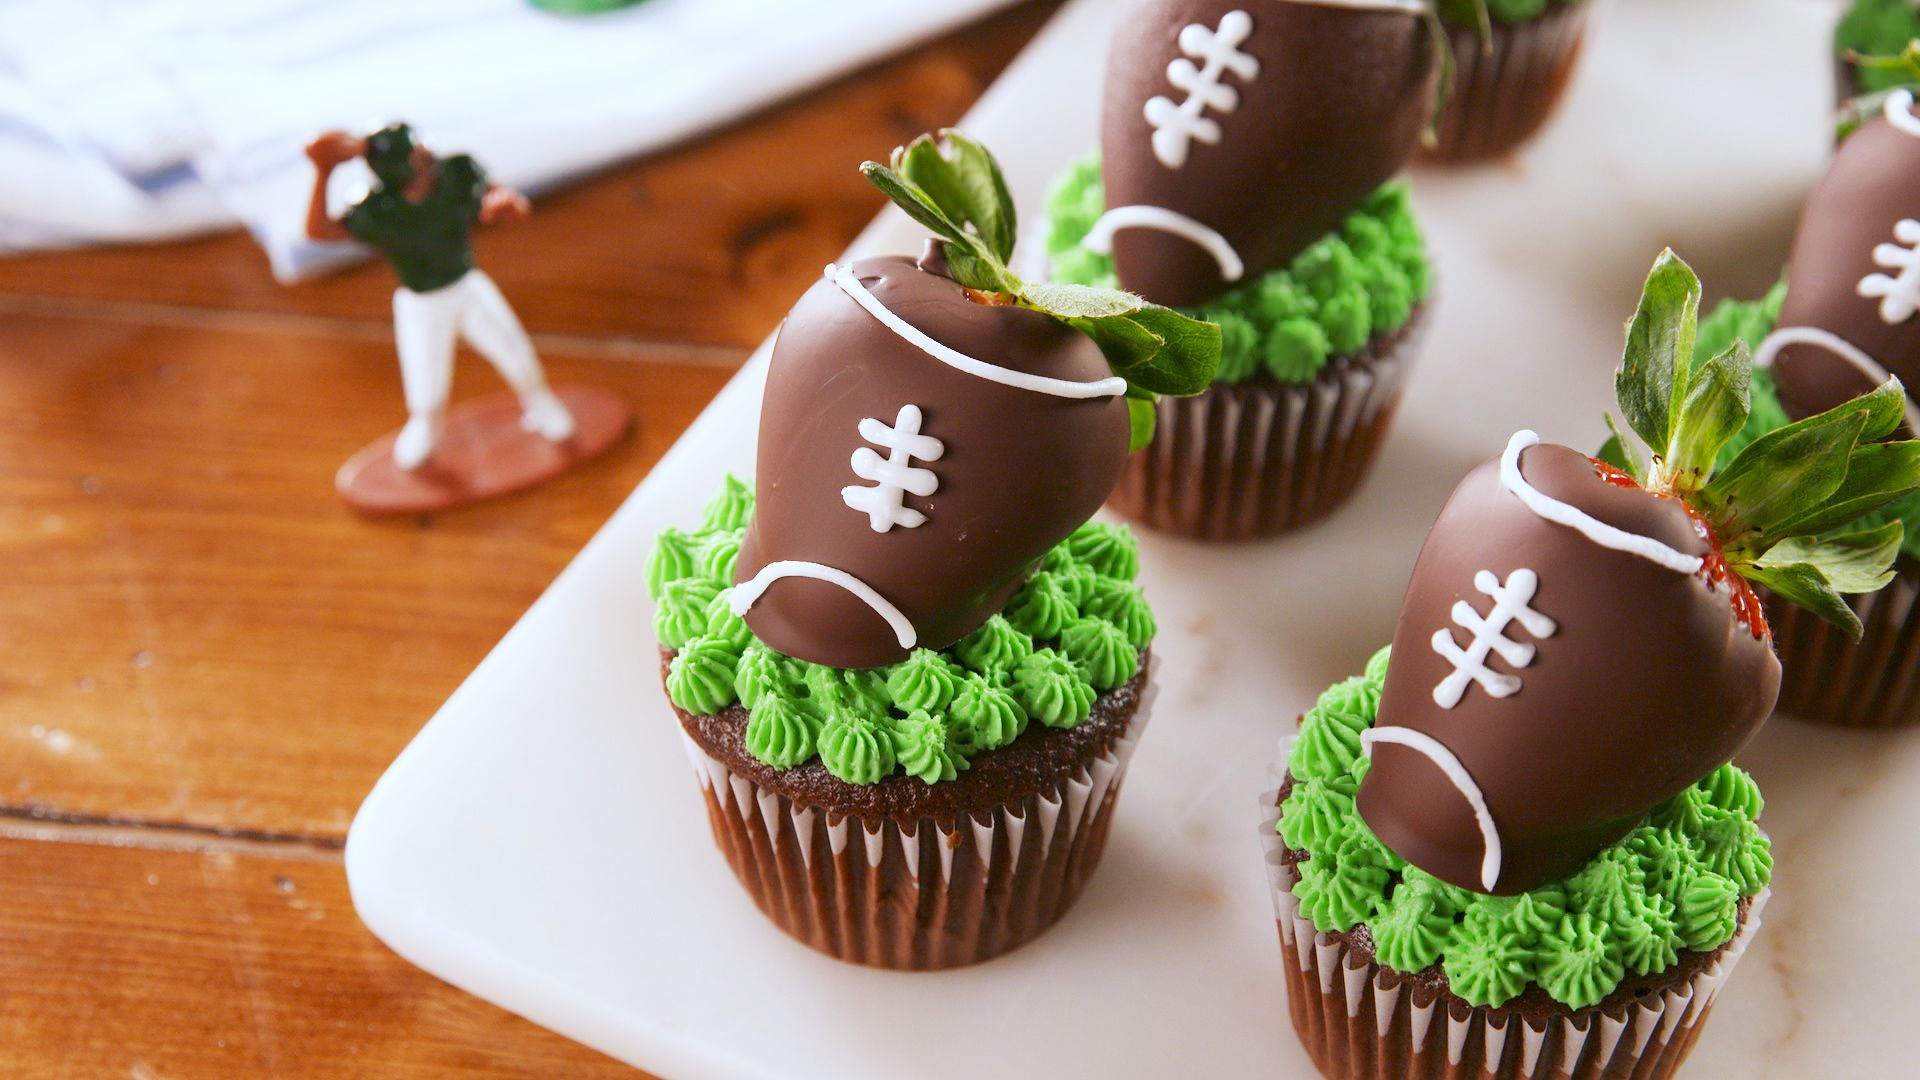 45 Best Super Bowl Party Ideas 2023 Football-Themed